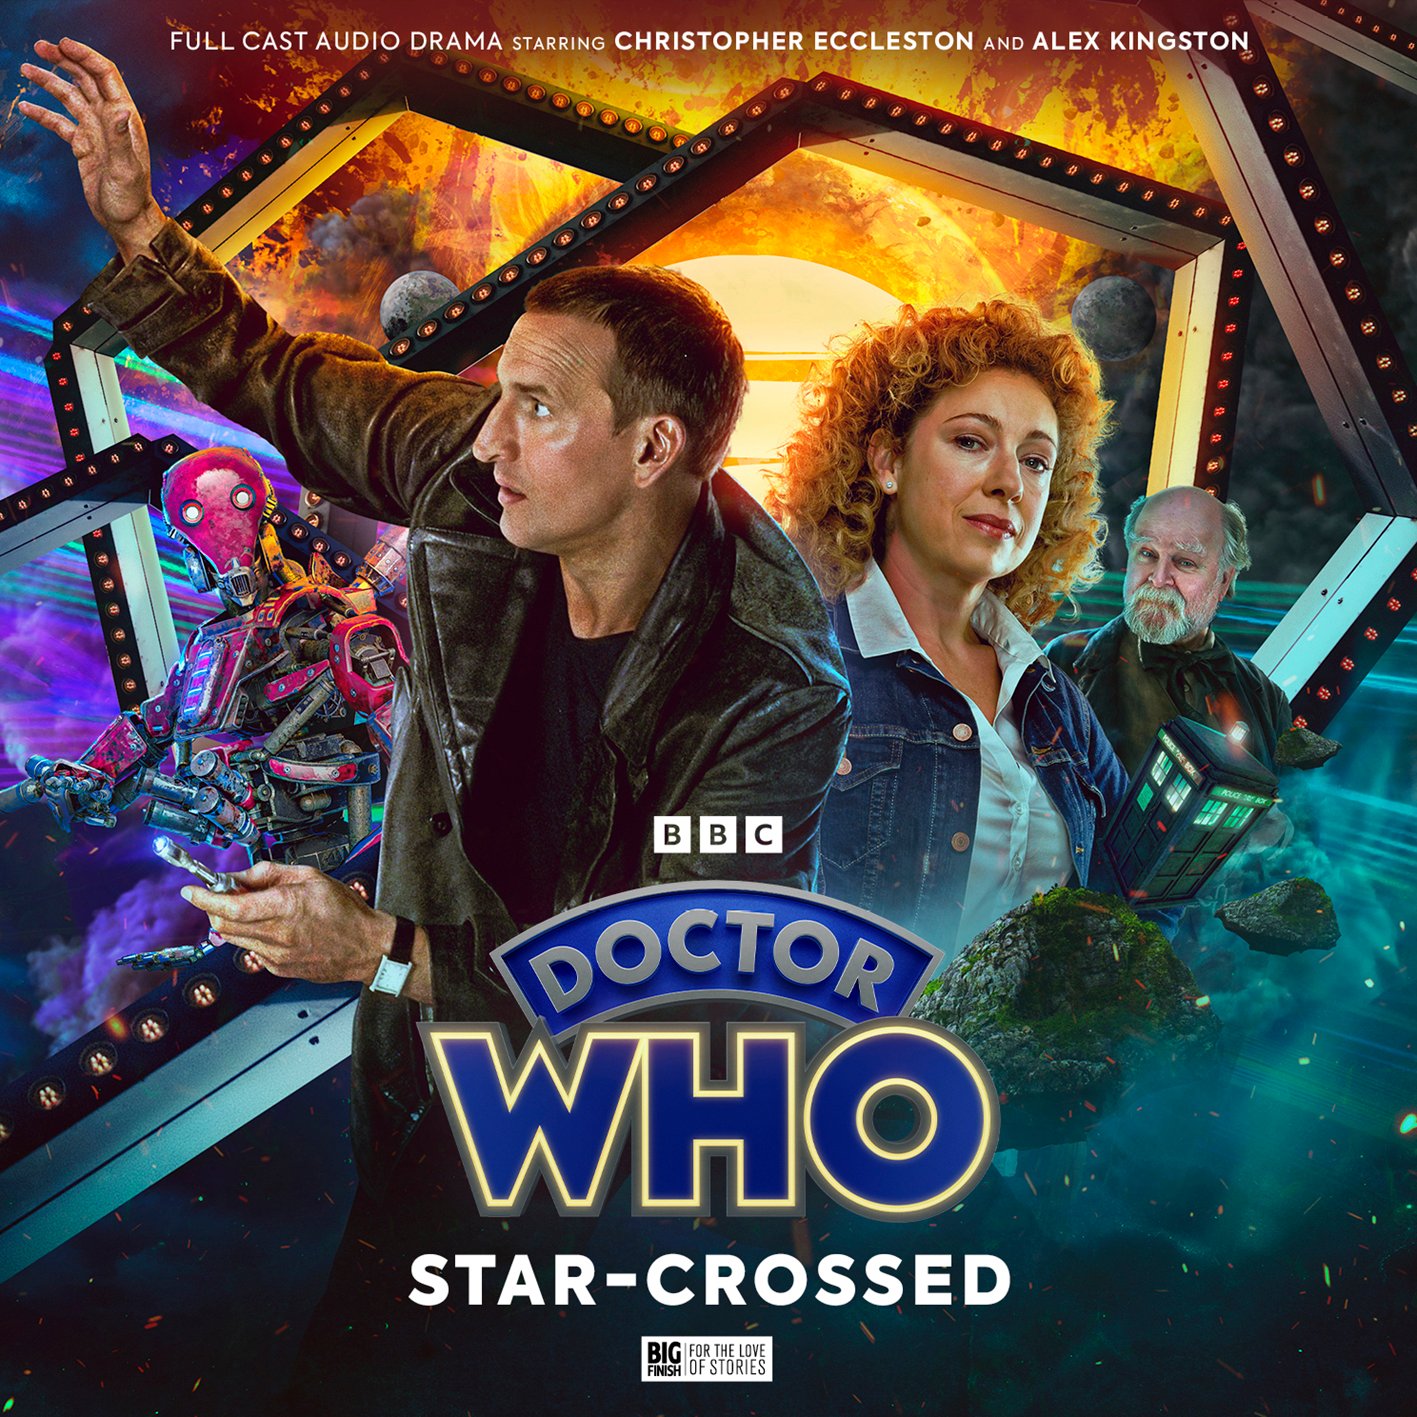 Christopher Eccleston’s Ninth Doctor to Meet Alex Kingston’s River Song in Next Audio Boxset